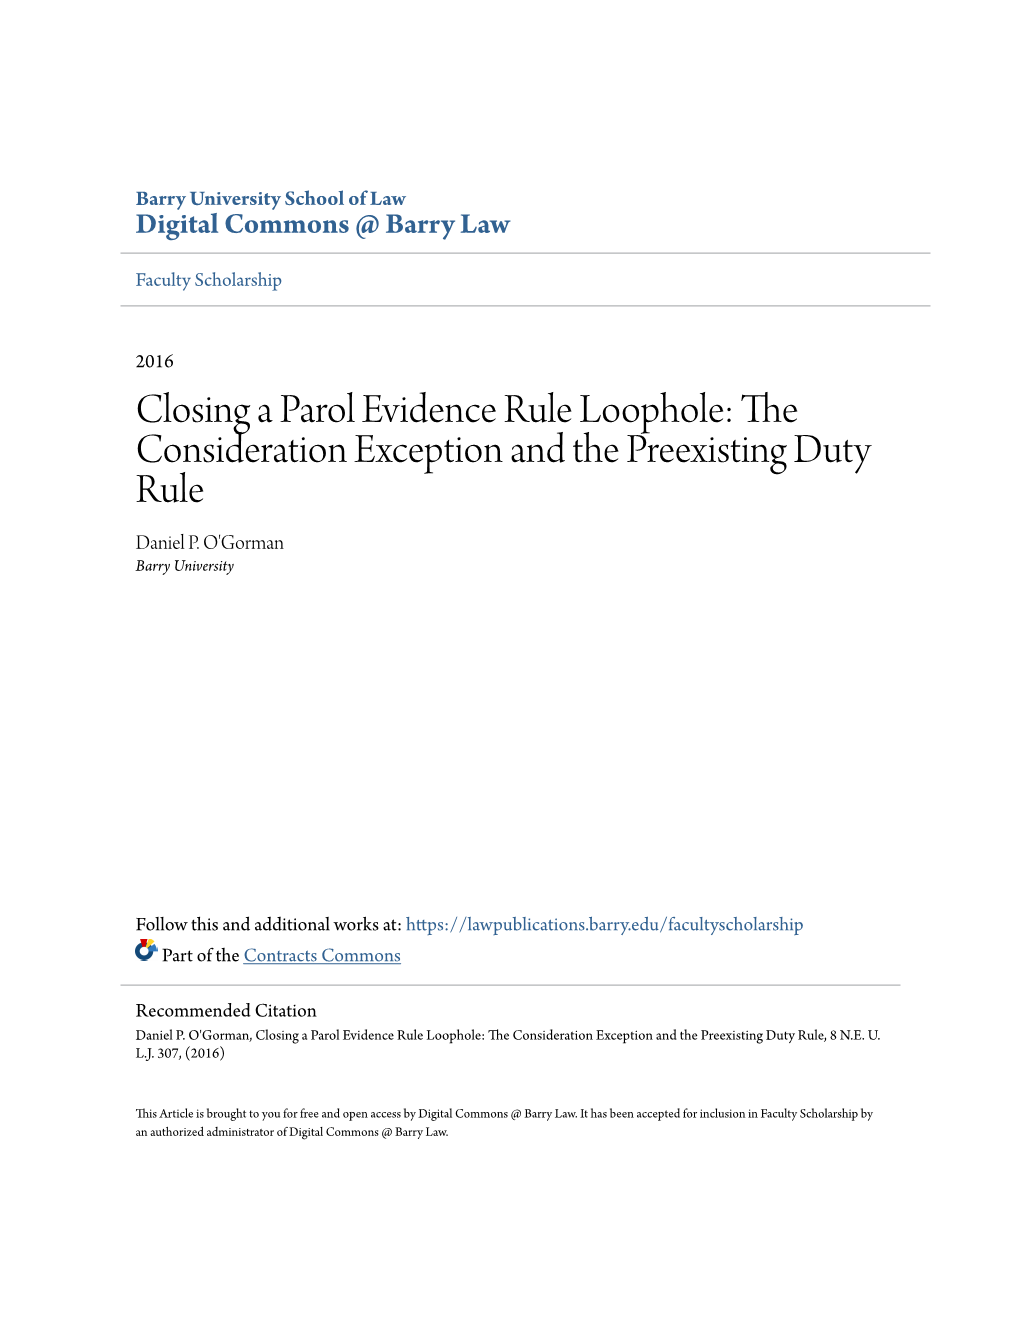 Closing a Parol Evidence Rule Loophole: the Consideration Exception and the Preexisting Duty Rule Daniel P